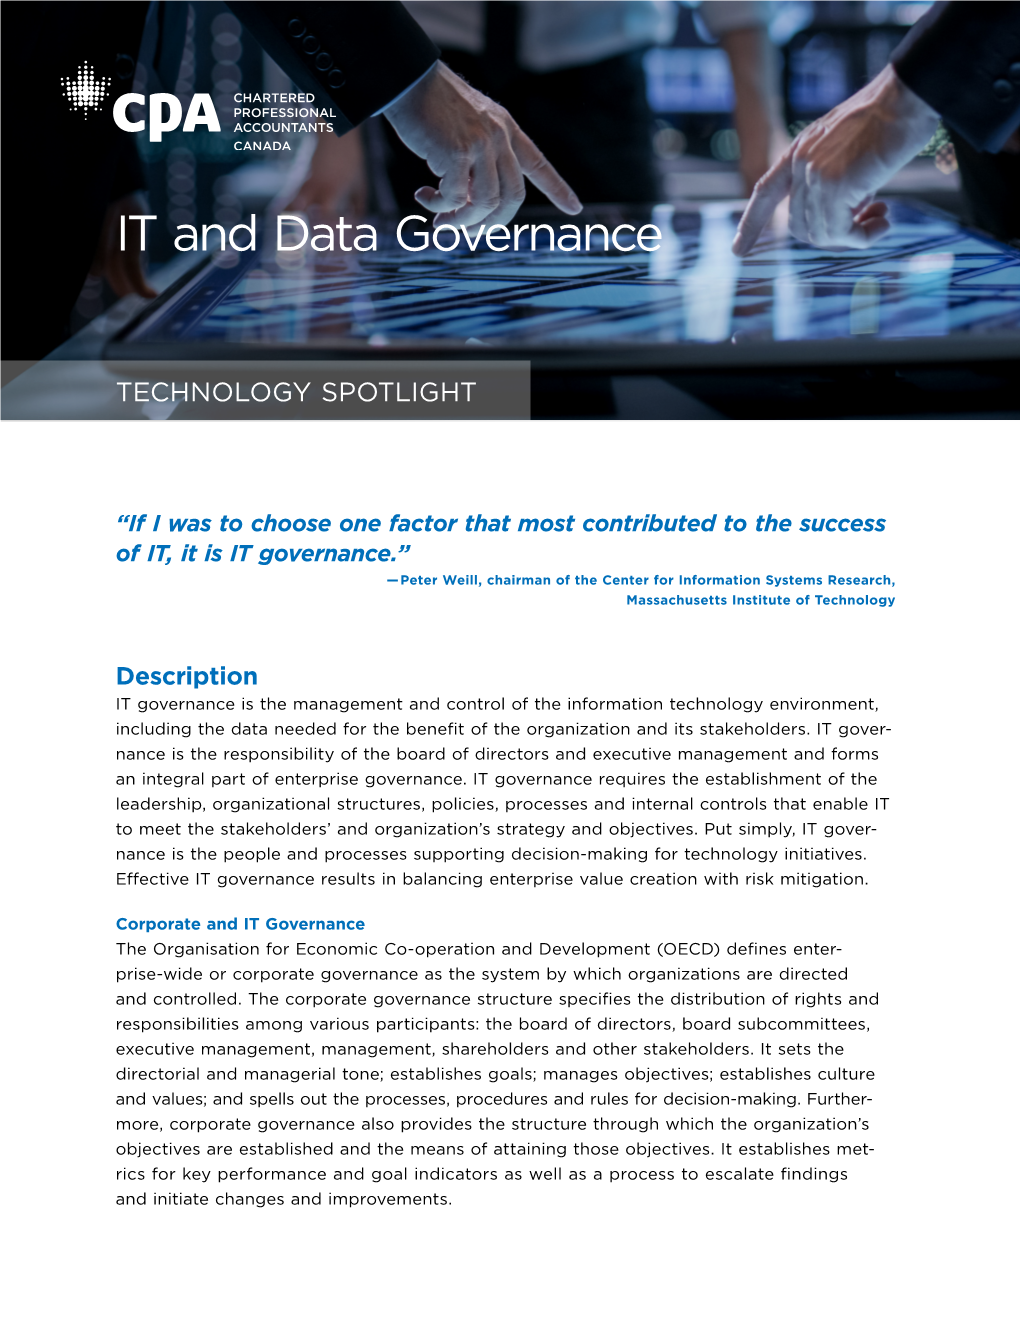 IT and Data Governance